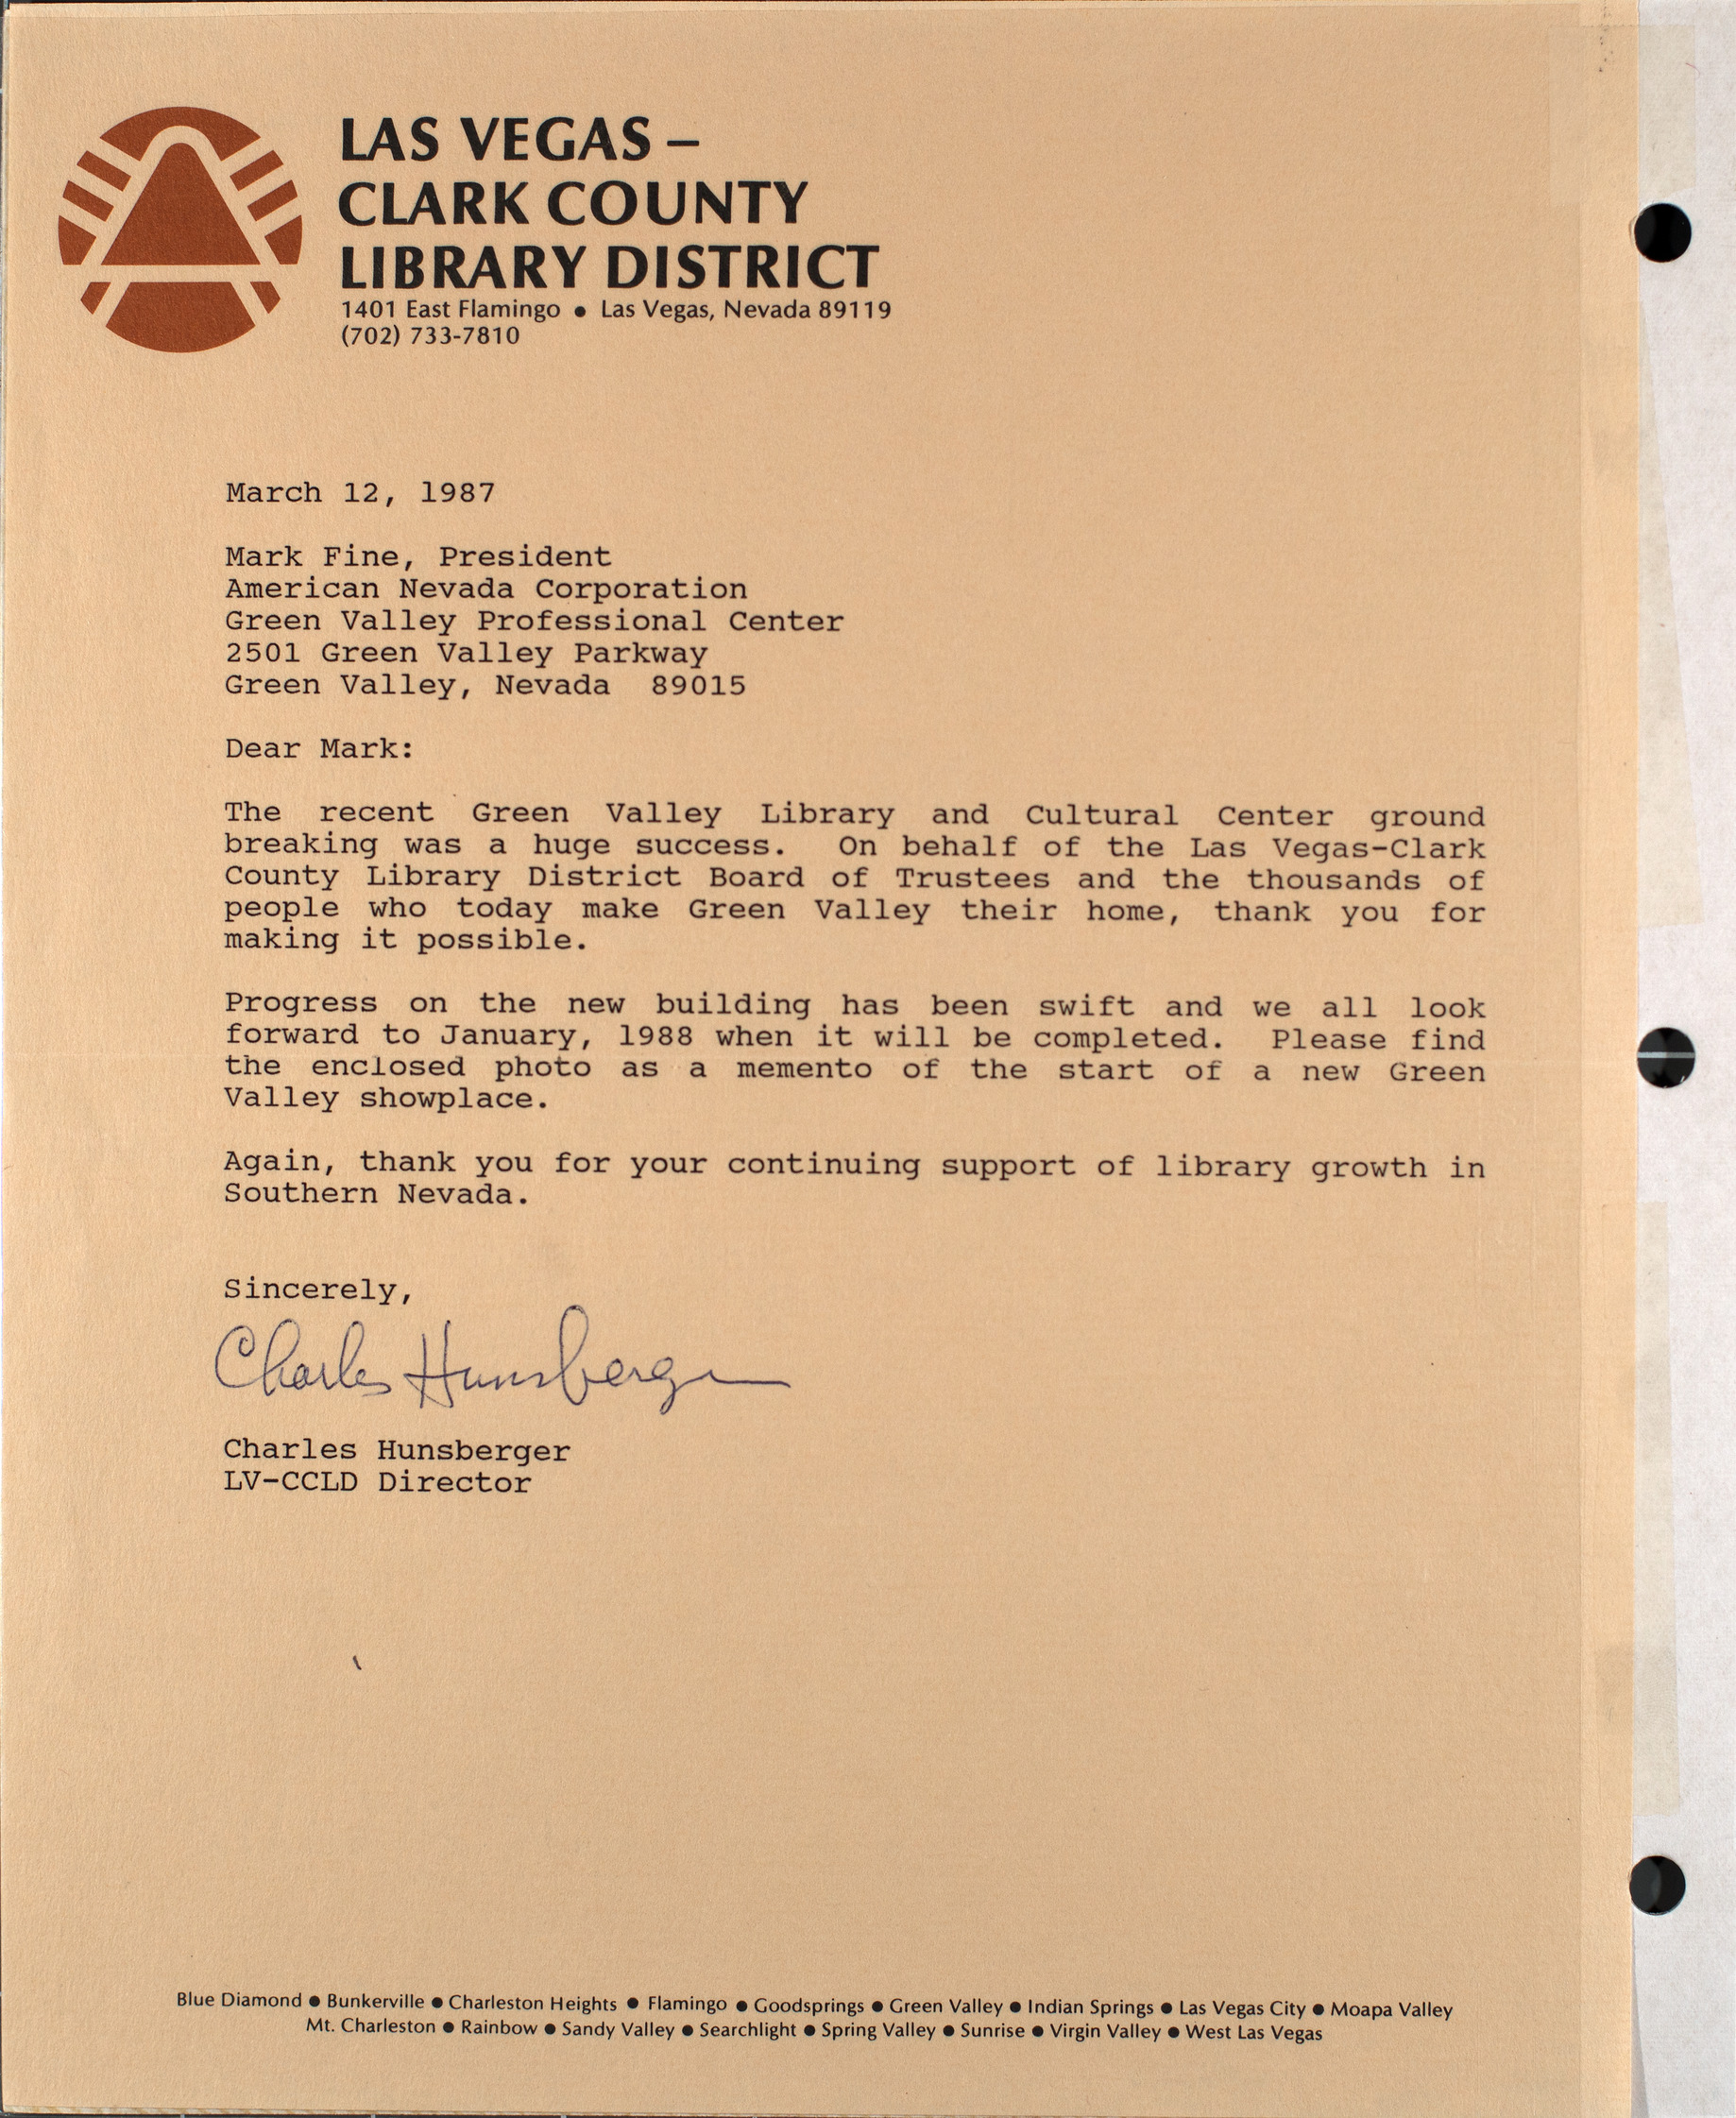 Letter from Charles Hunsberger to Mark Fine, March 12, 1987